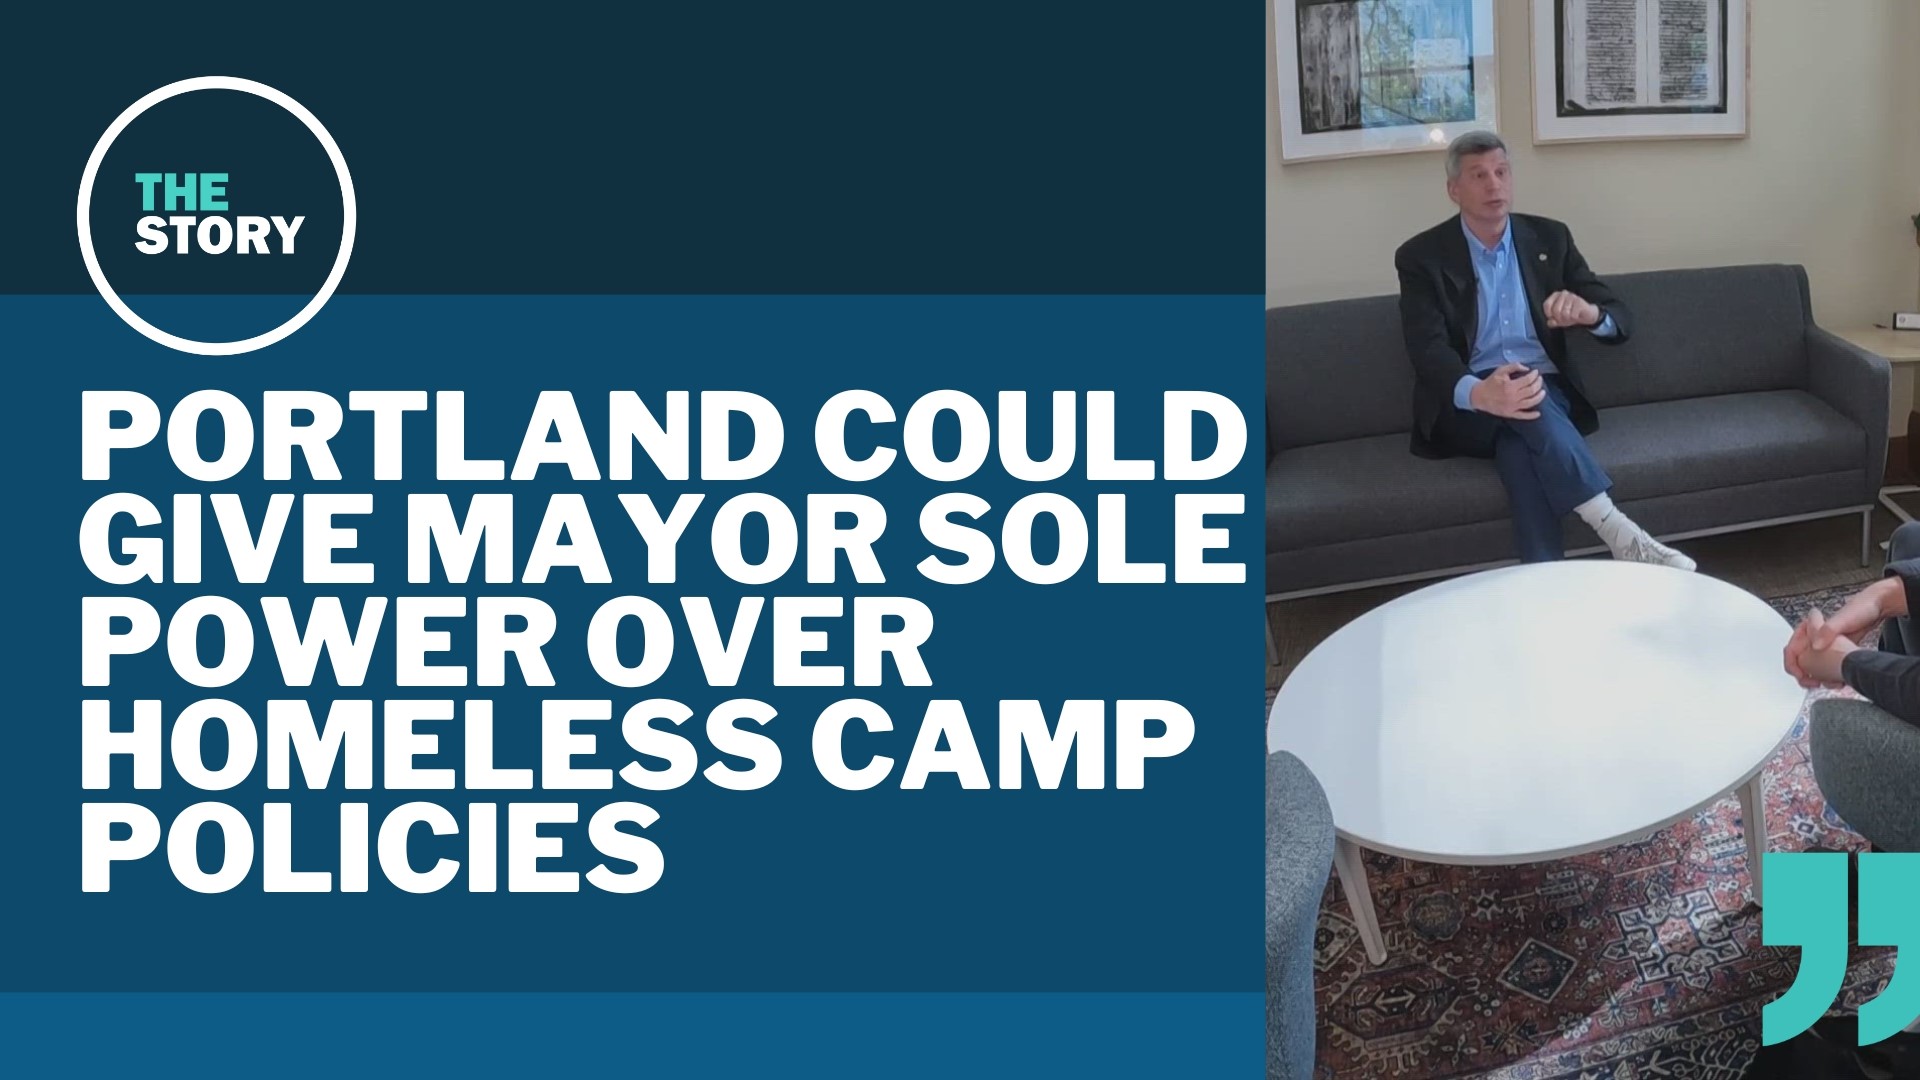 Commissioner Rene Gonzalez has walked back the higher penalties for homeless people included in his counter to Mayor Ted Wheeler's plan, but differences remain.